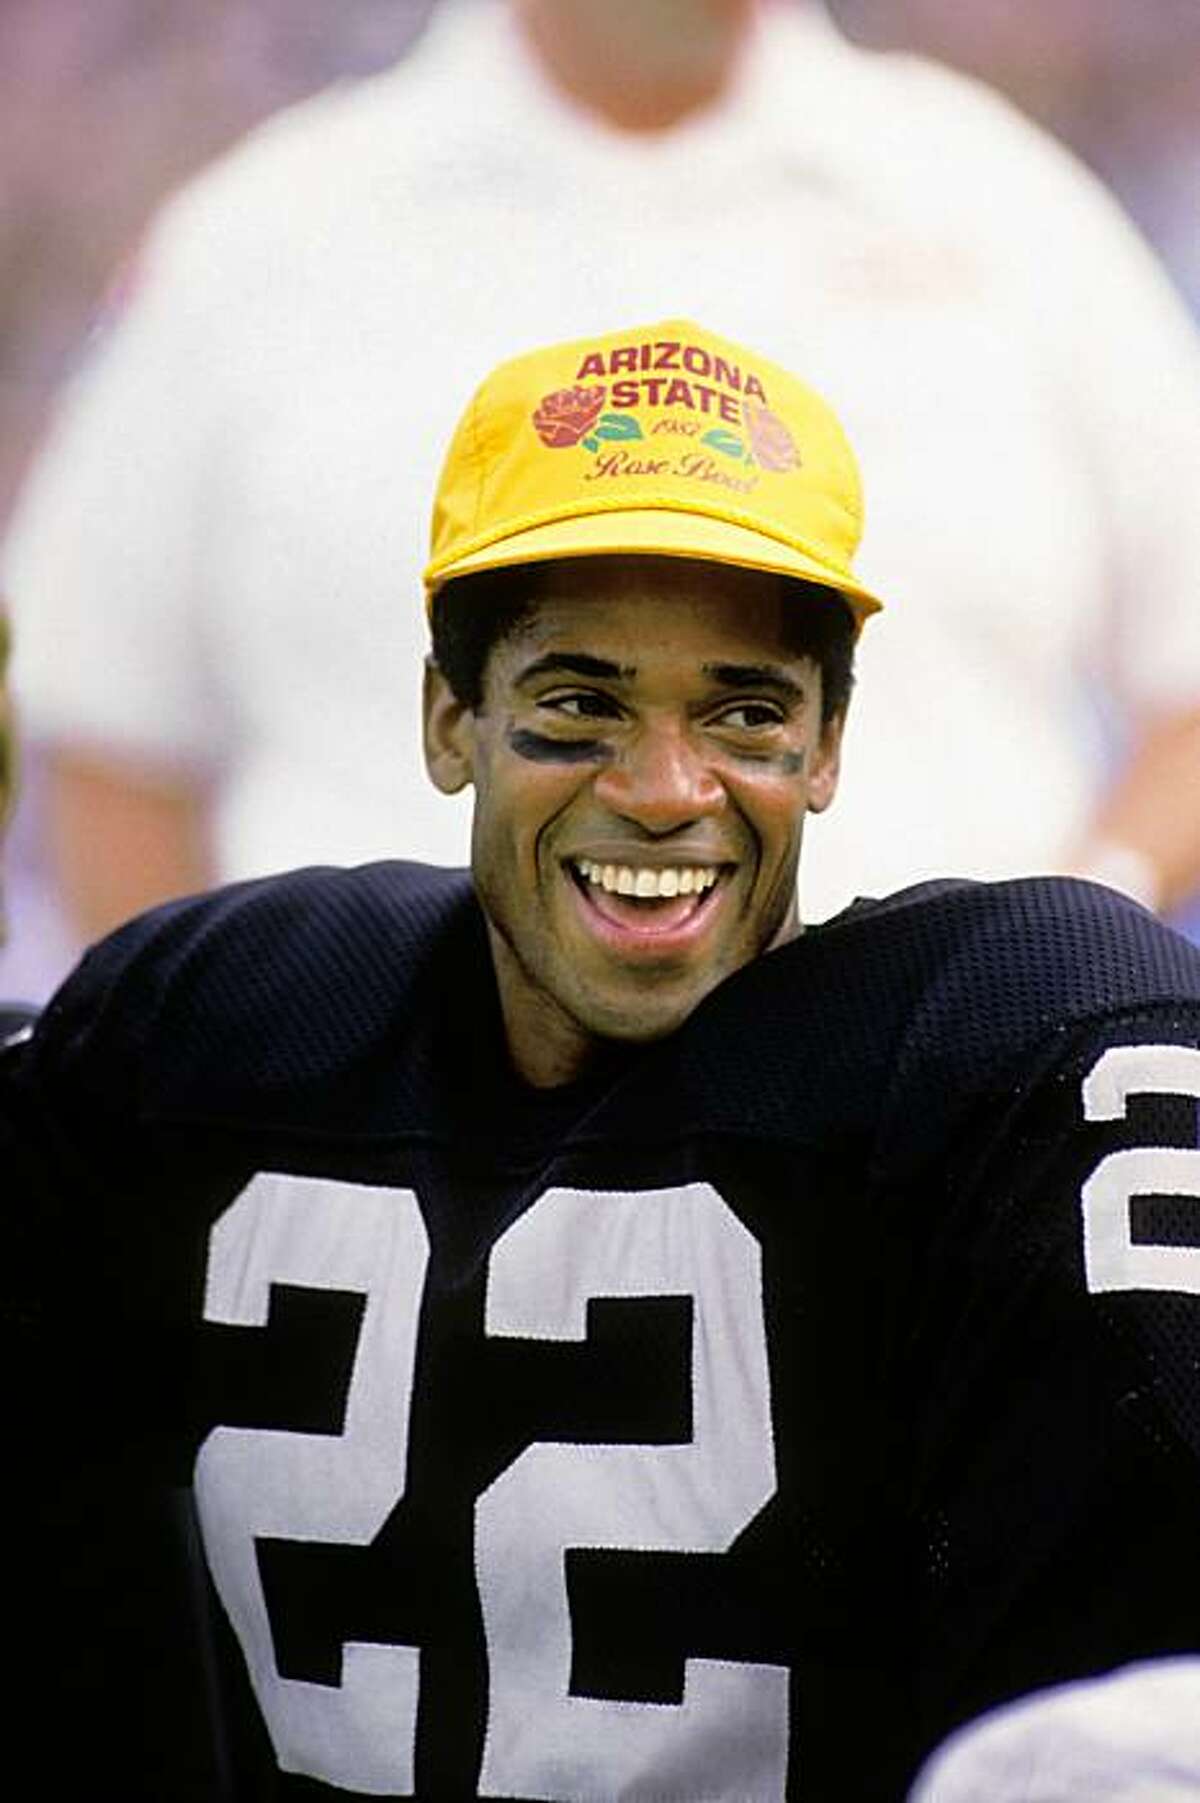 LOS ANGELES - NOVEMBER 16: Defensive back Mike Haynes #22 of the Los Angeles Raiders looks on during the game against the Cleveland Browns at the Los Angeles Memorial Coliseum on November 16, 1986 in Los Angeles, California. The Raiders won 27-14. (Photo by George Rose/Getty Images)